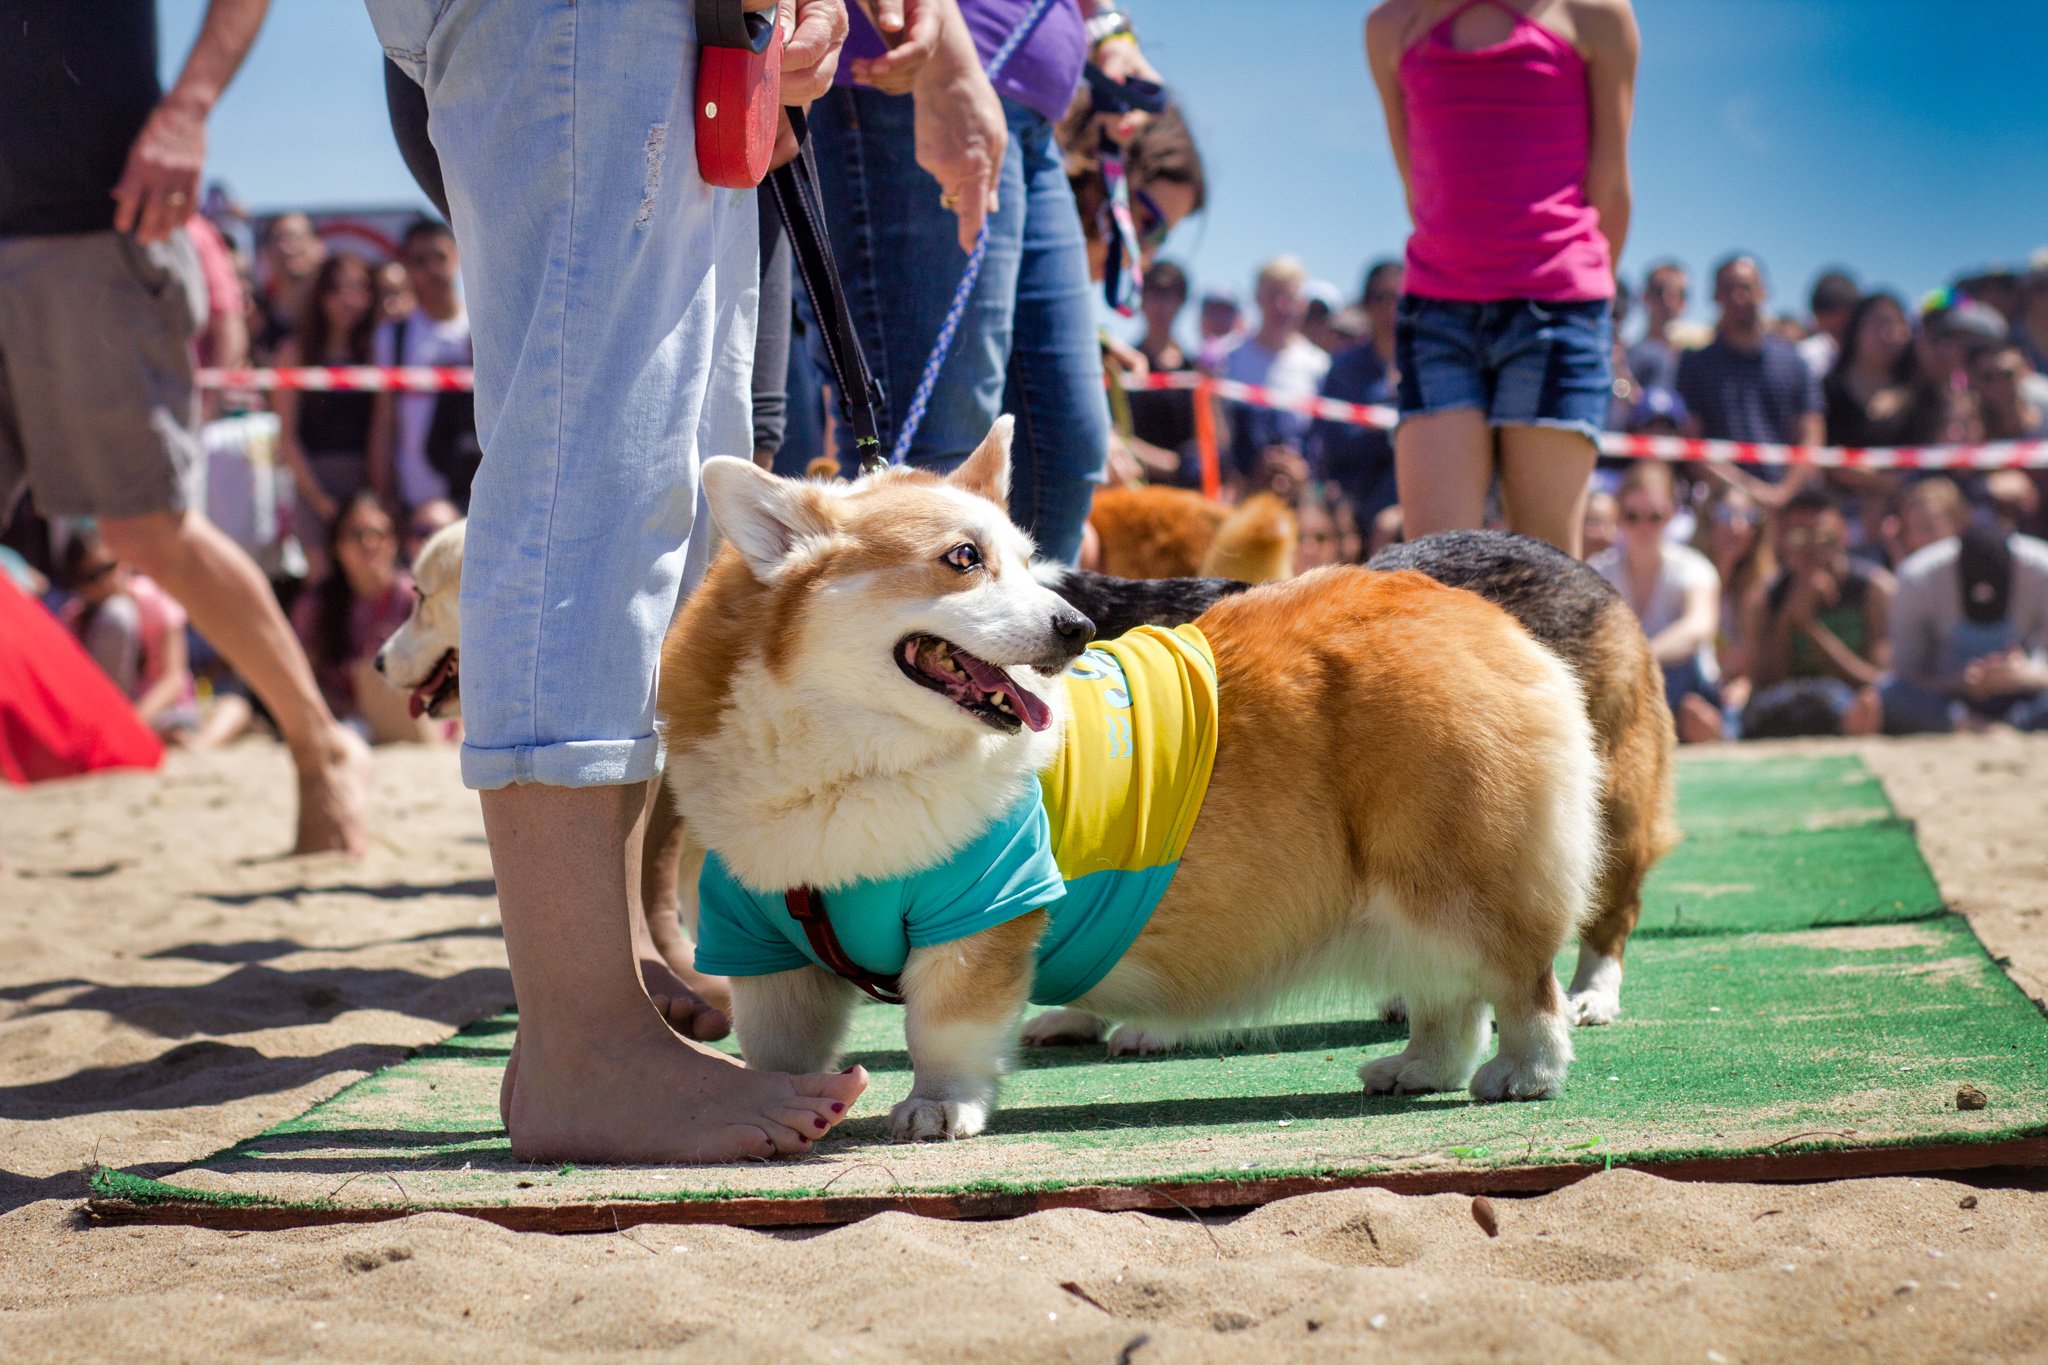 Orange County Pet and Dog Photography - by Steamer Lee - Corgi Beach Day Spring 2019 - Southern Caliornia 19 (1) (1).JPG